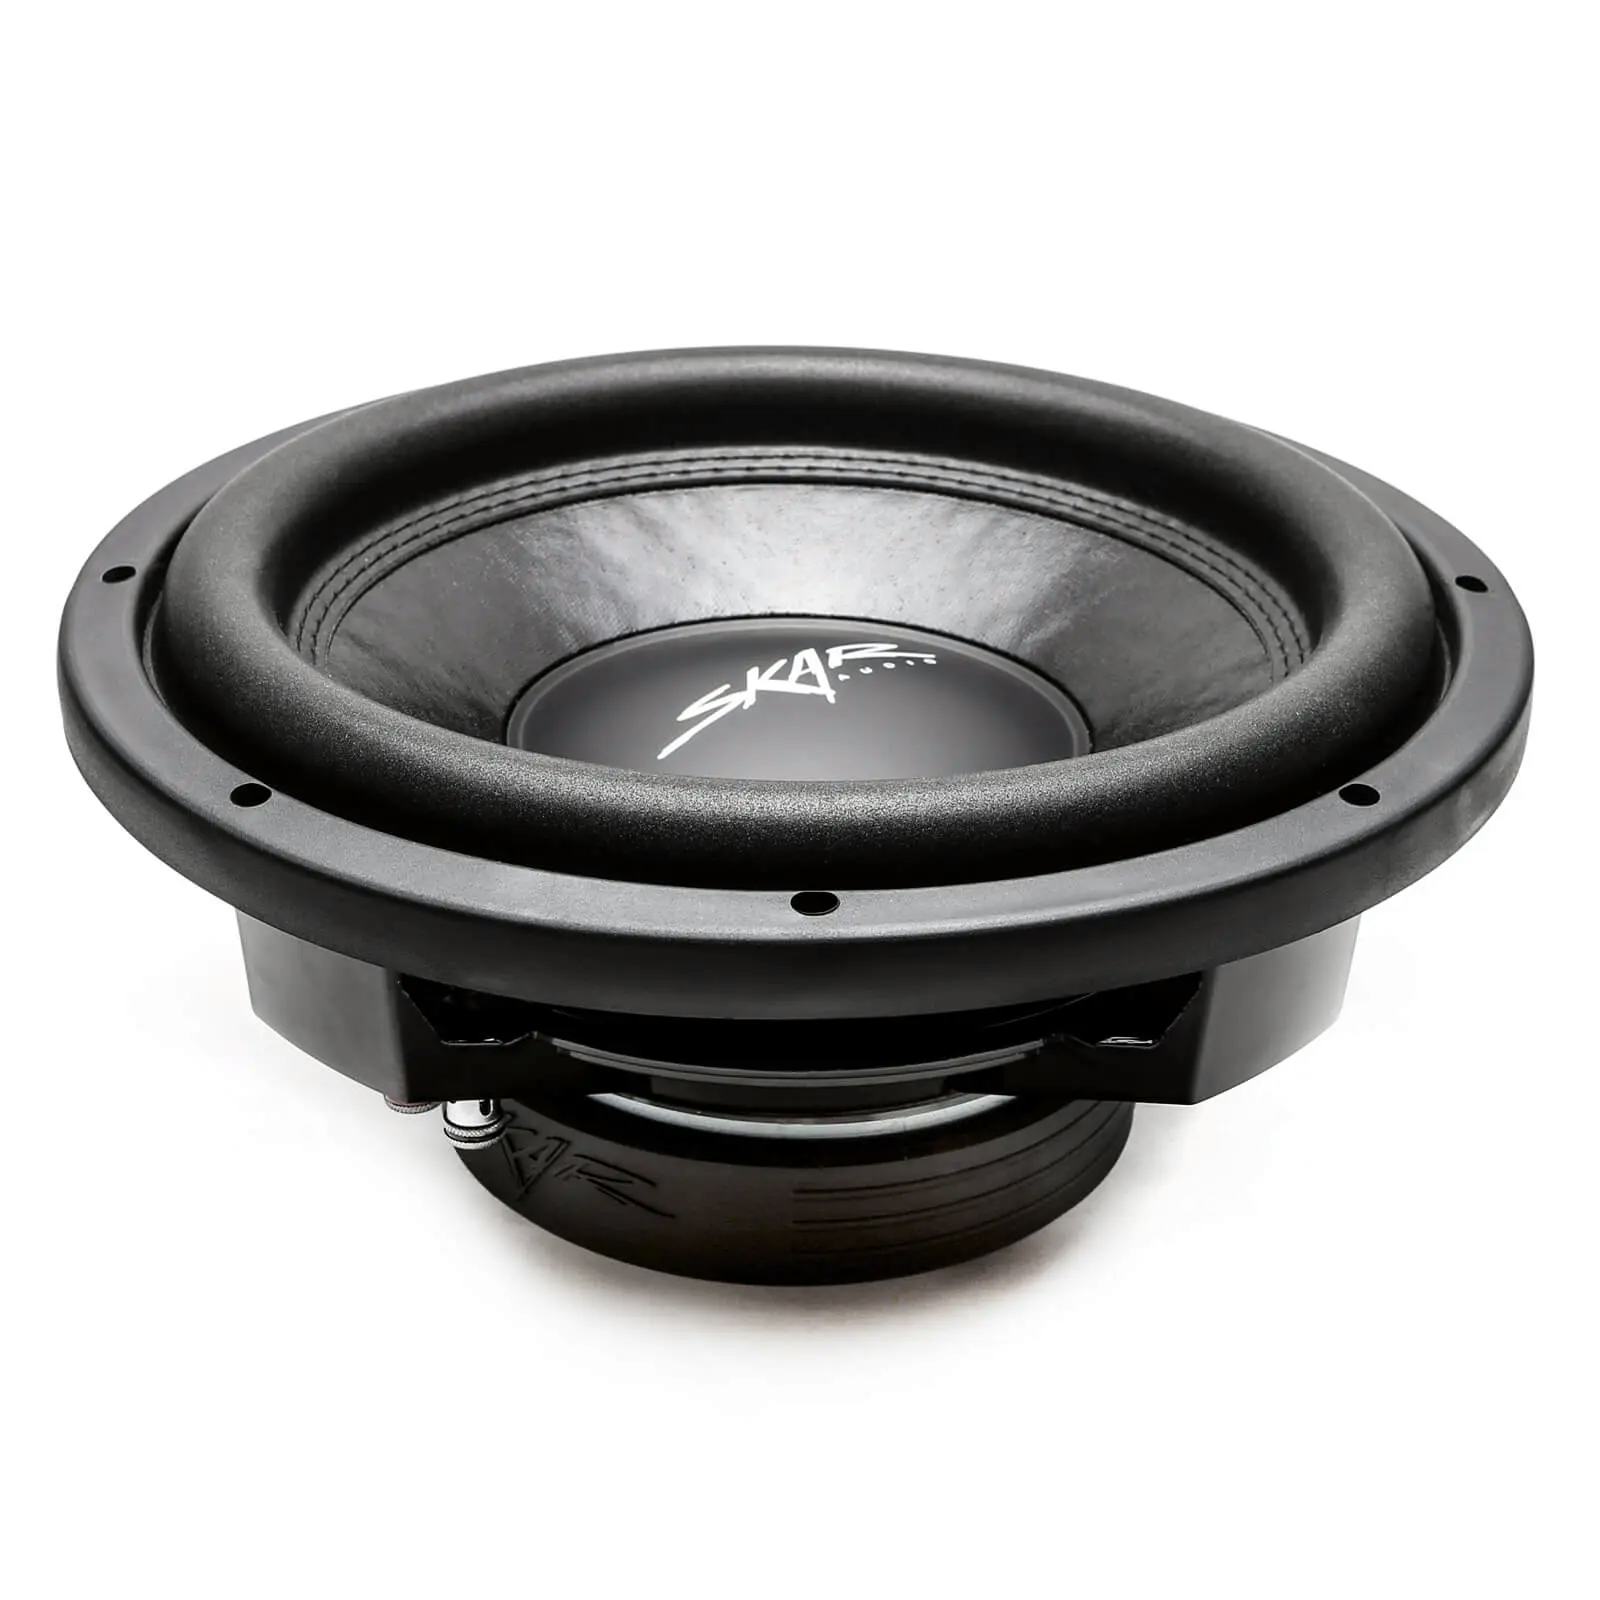 Dual 10" 1,600W Max Power Loaded Ported Subwoofer Enclosure Compatible with 2014-2021 Toyota Tundra Crew Max Cab Trucks #7